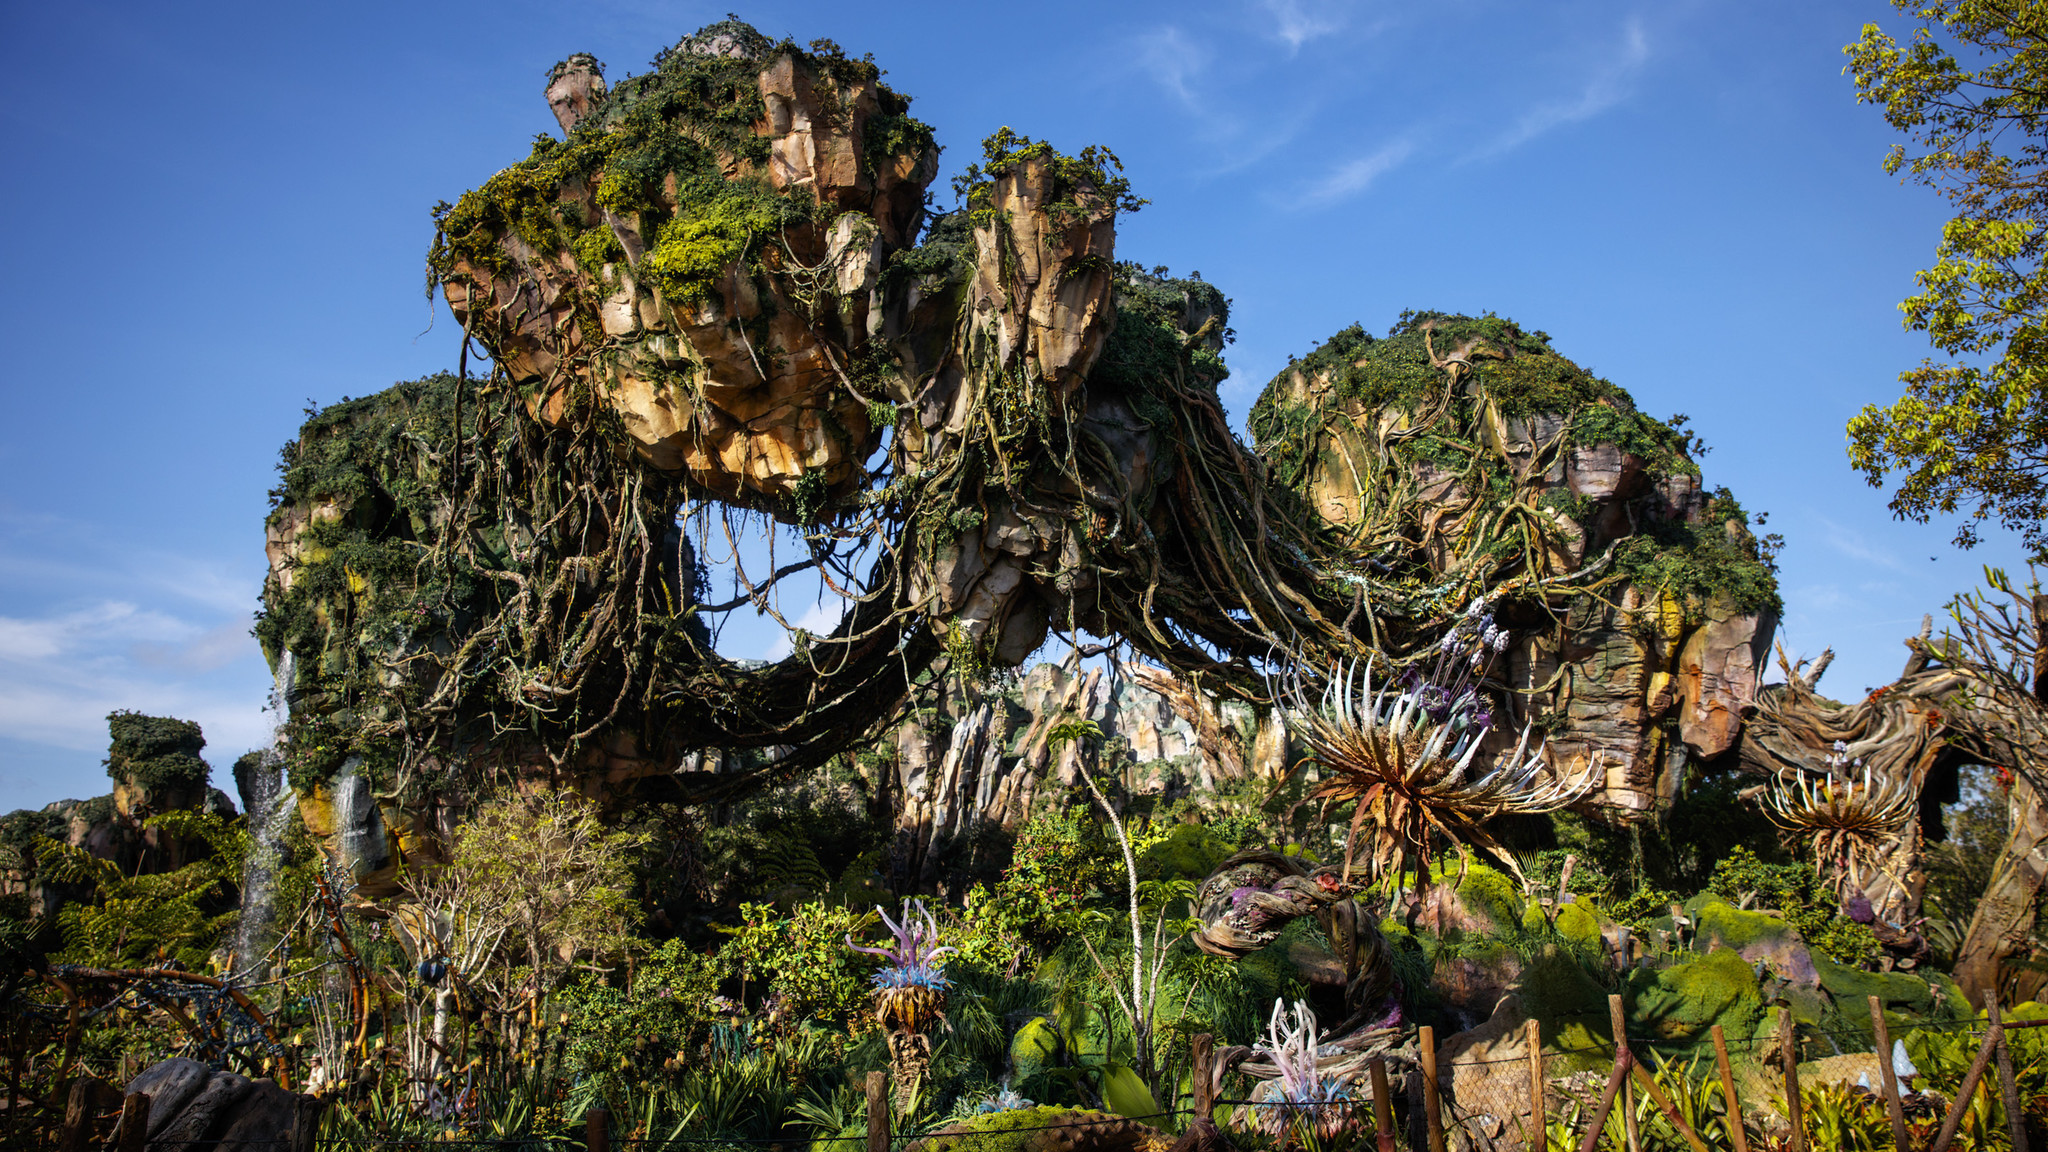 The floating mountains of Pandora.